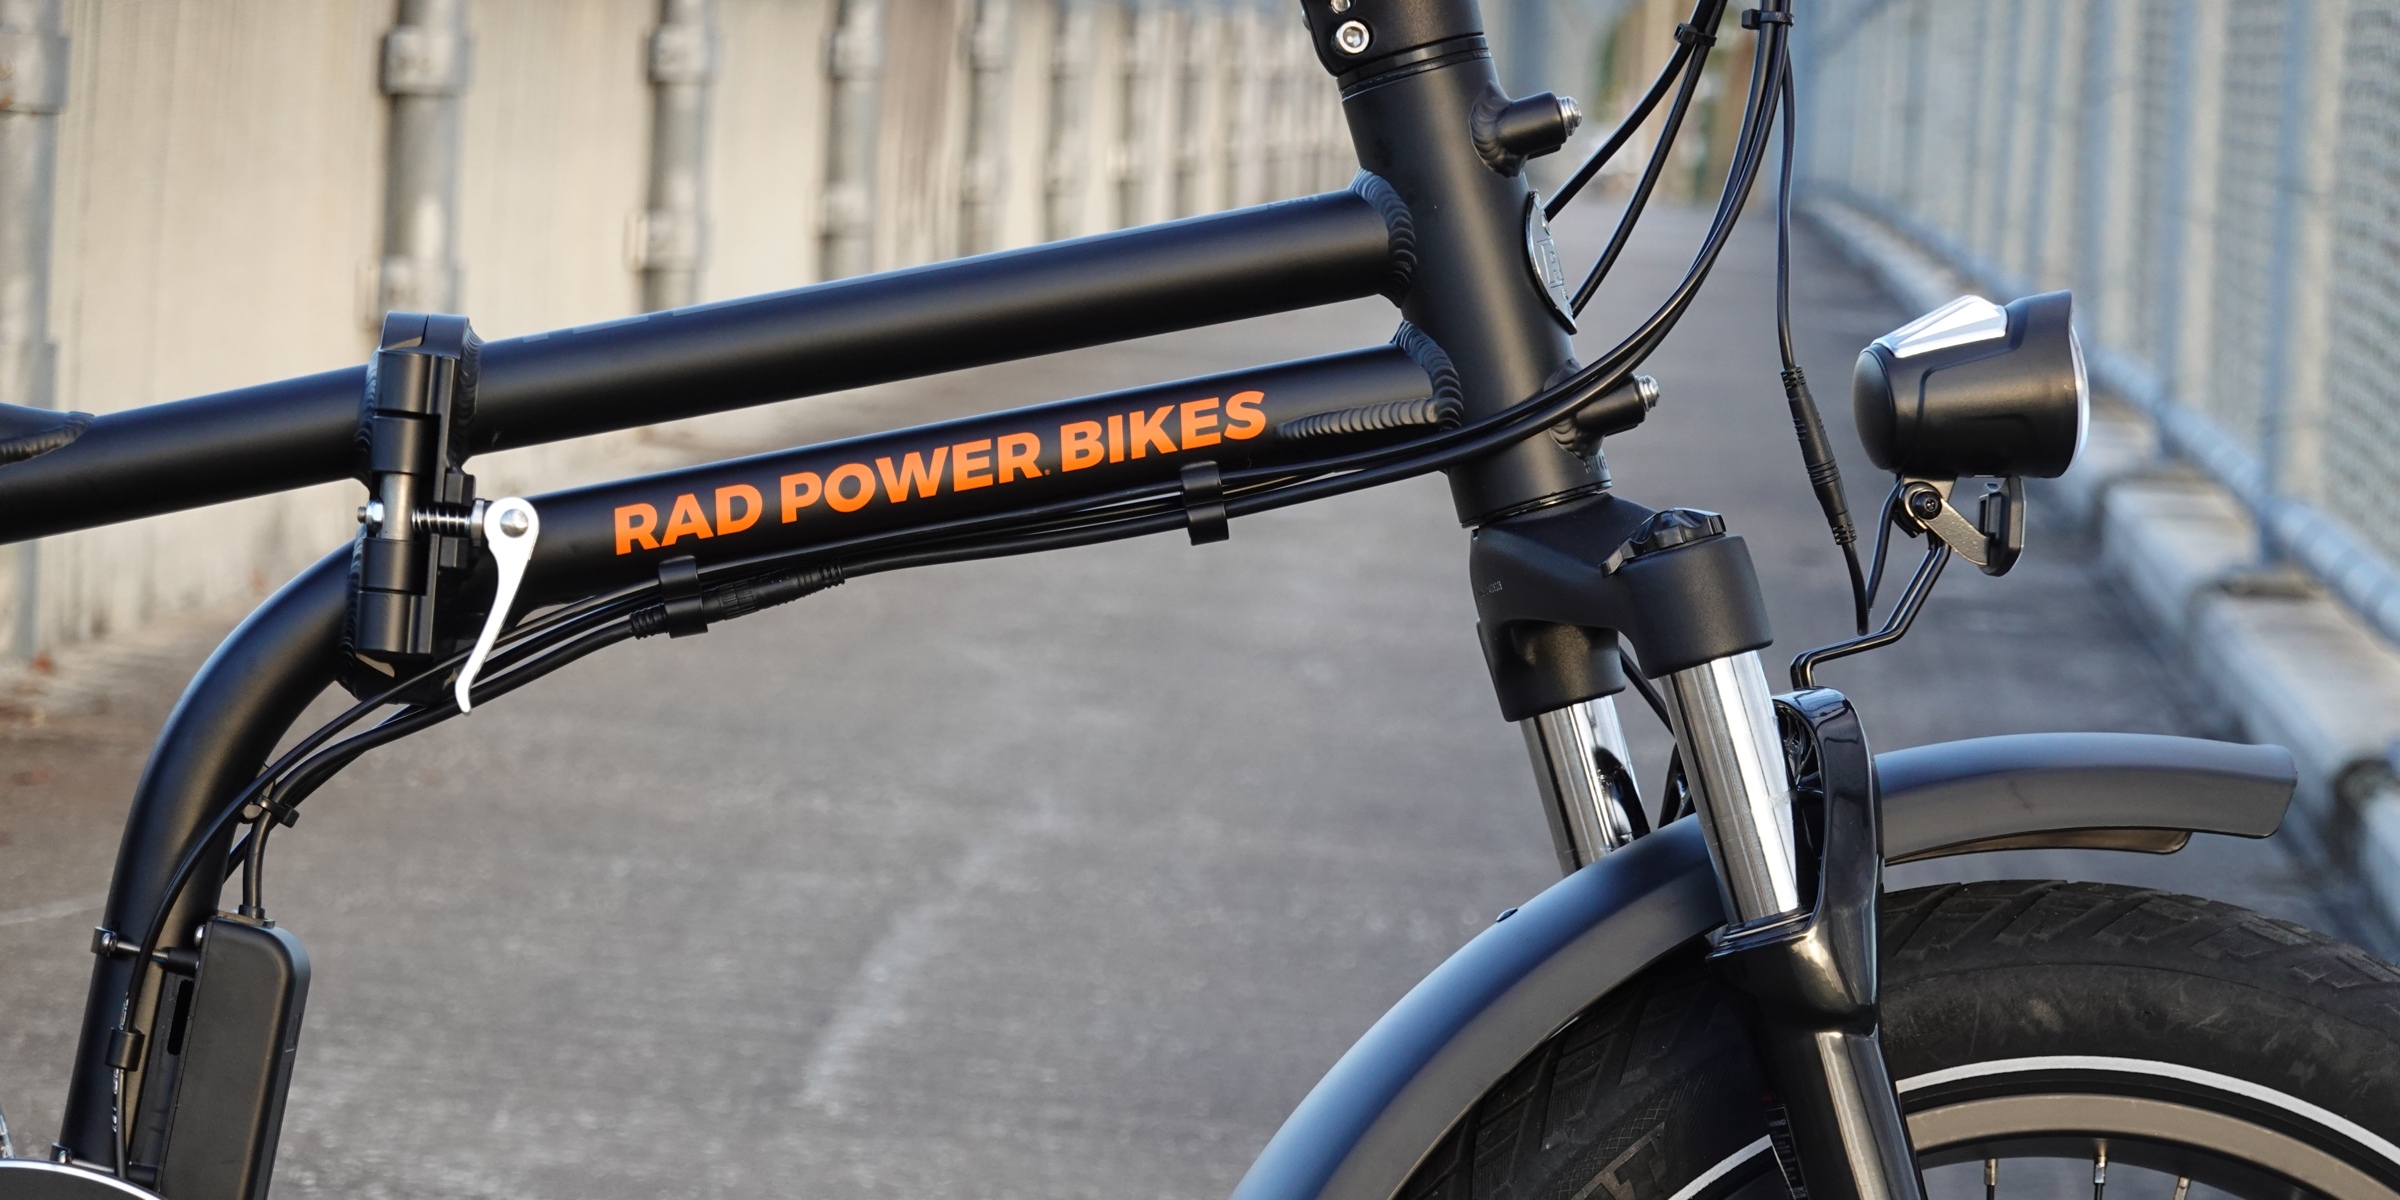 Electric bicycle prices from major brands are beginning to drop in the US